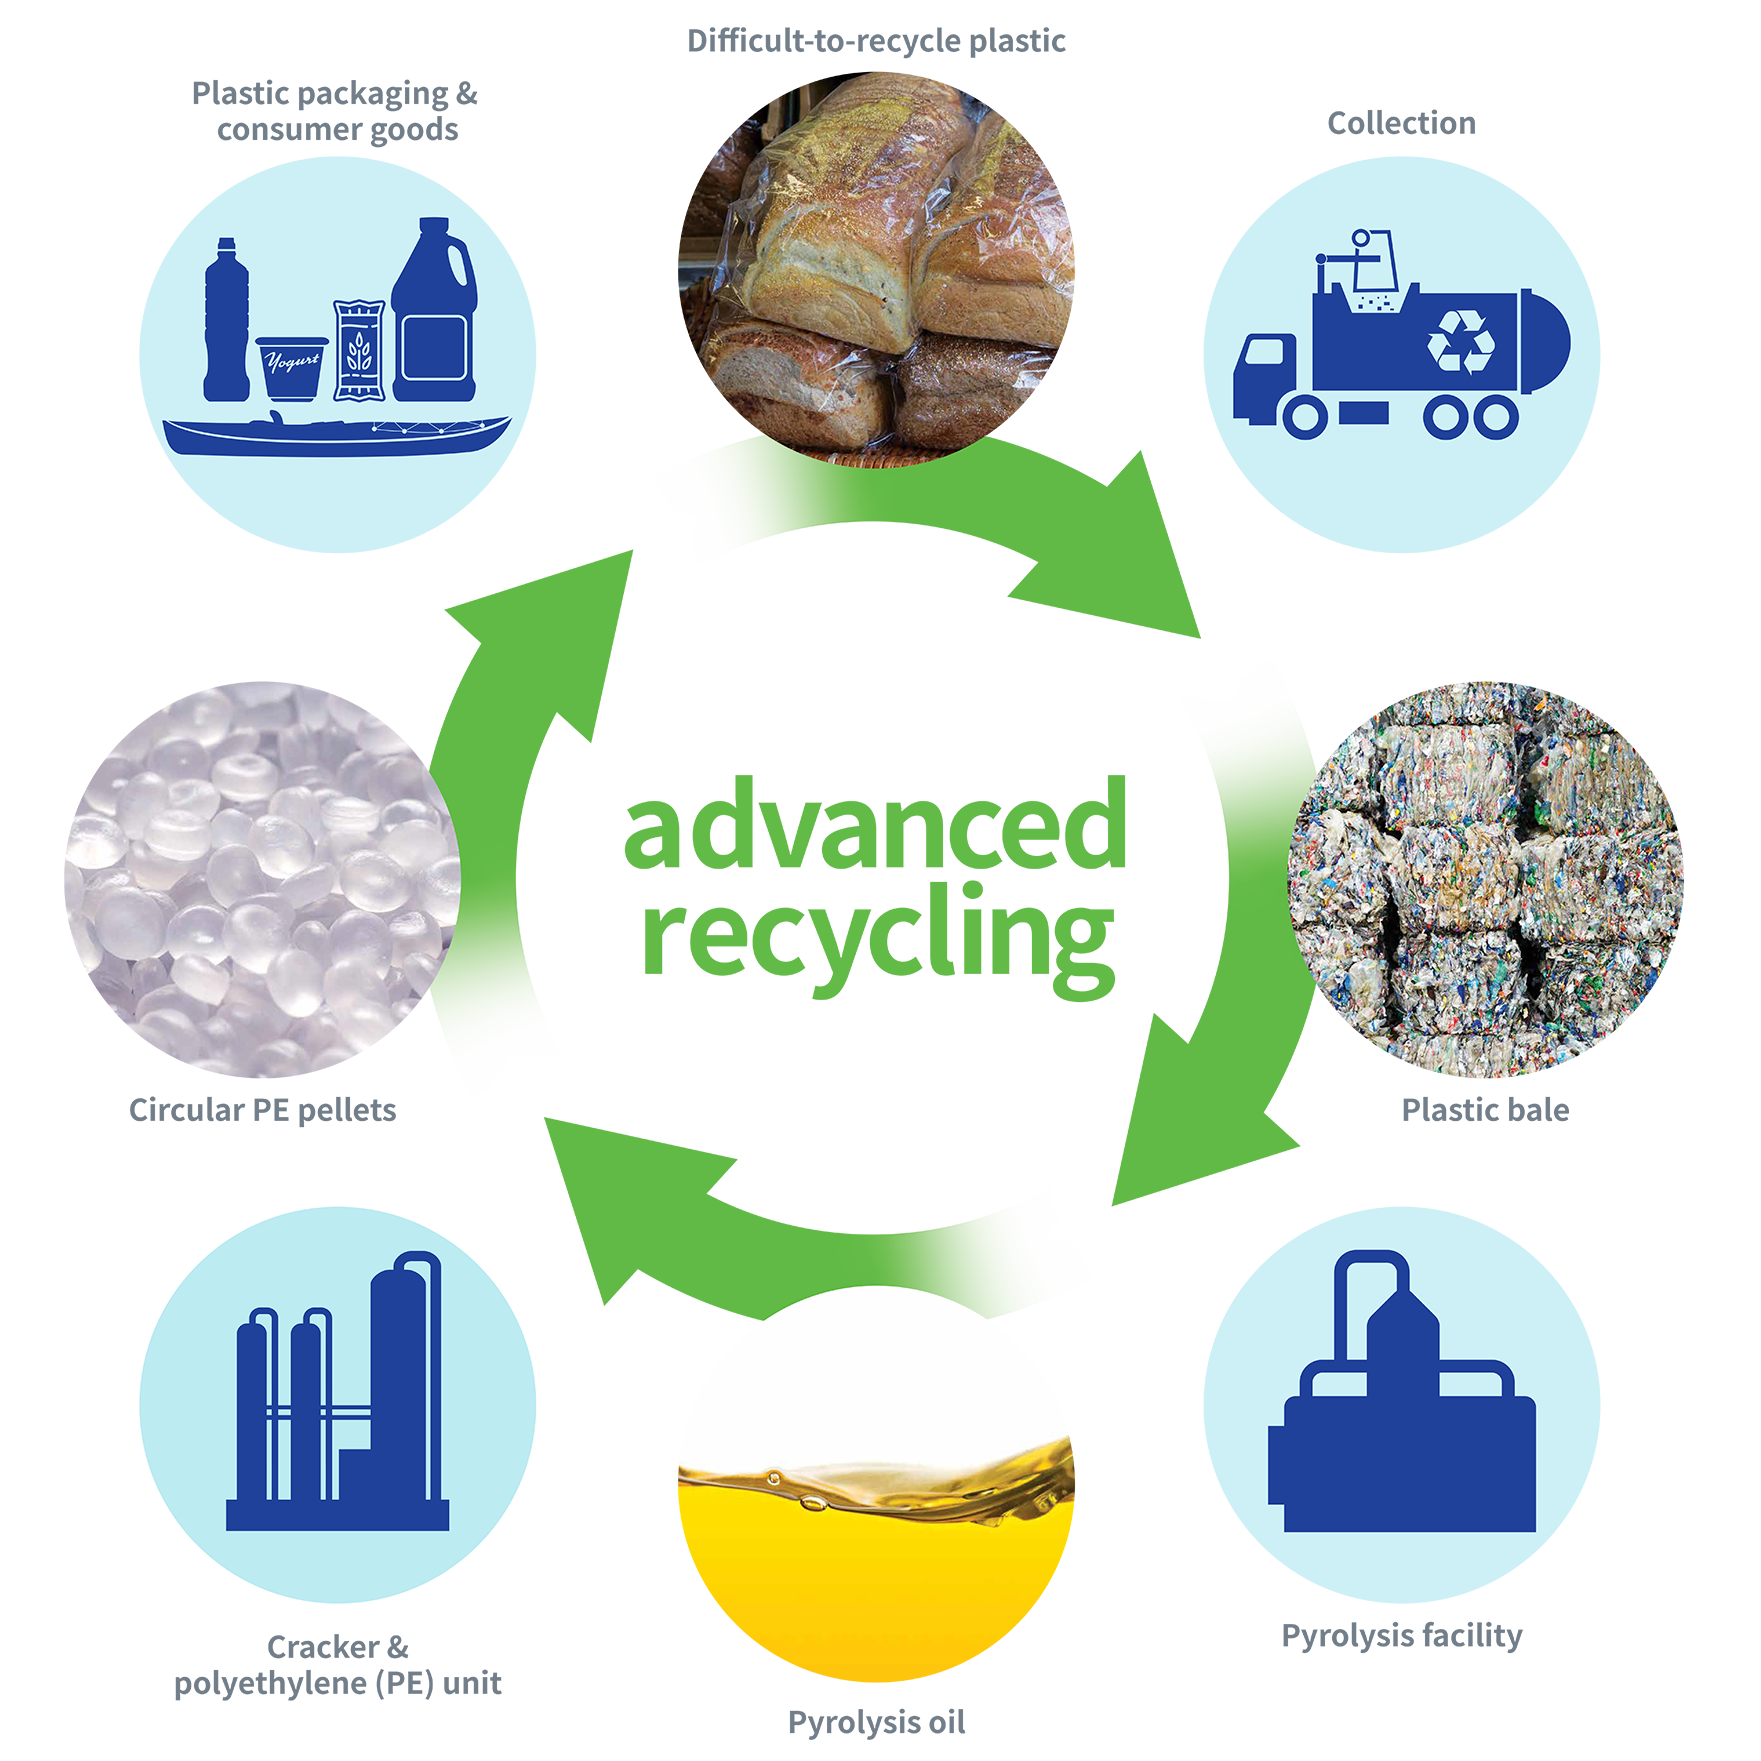 Advanced recycling infographic